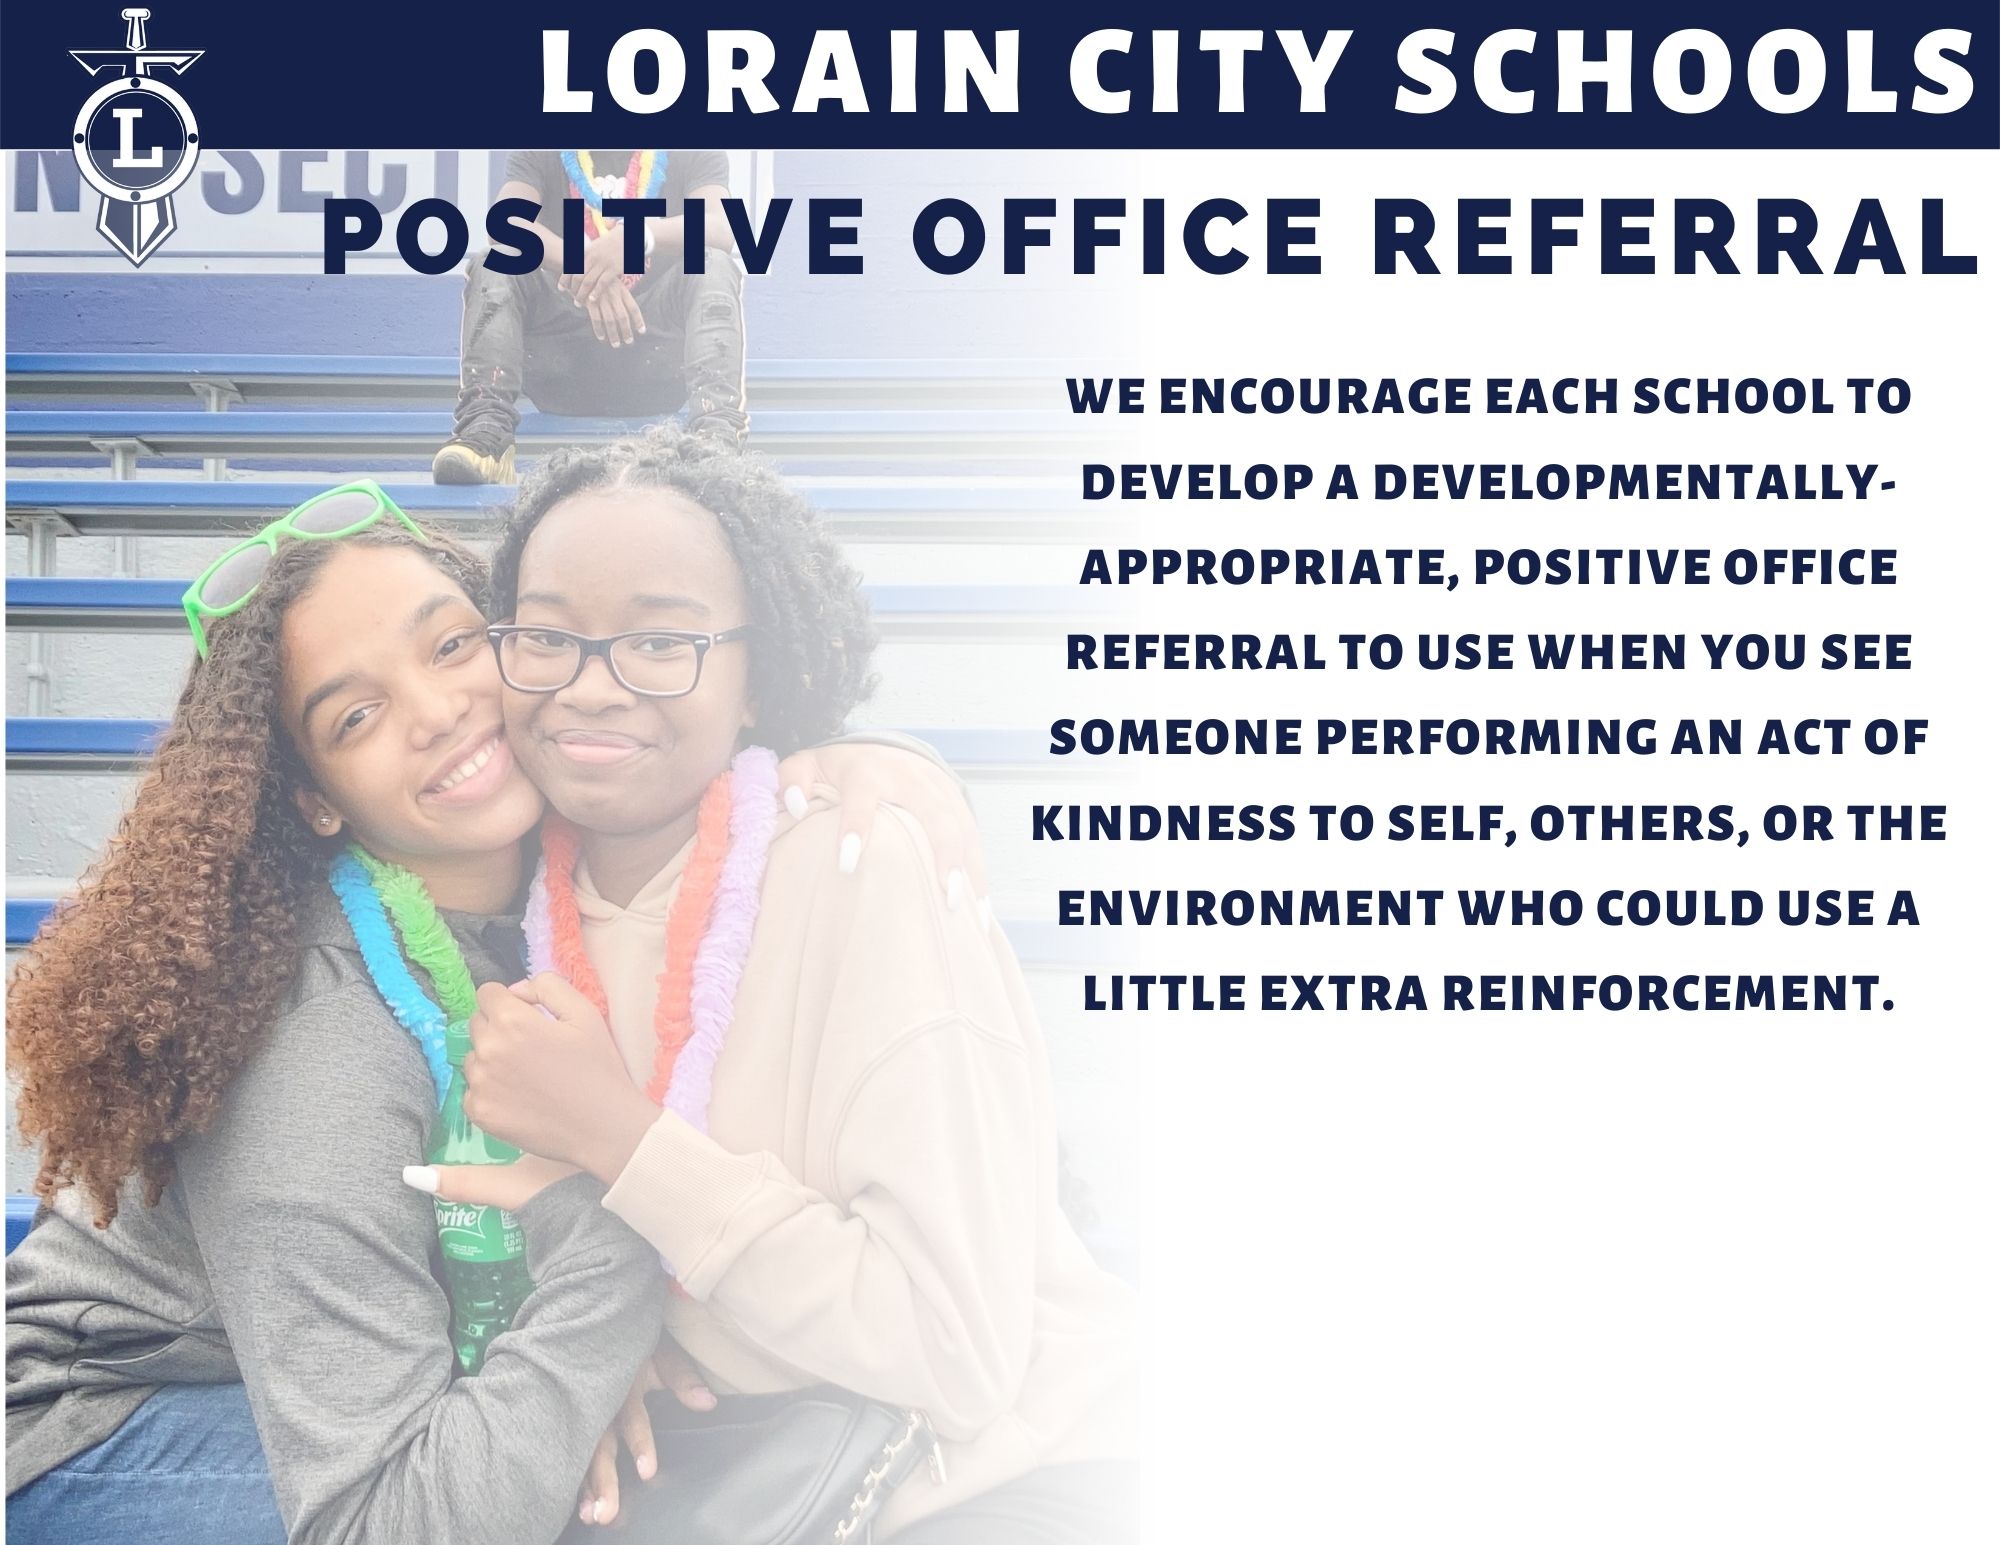 Positive office referral